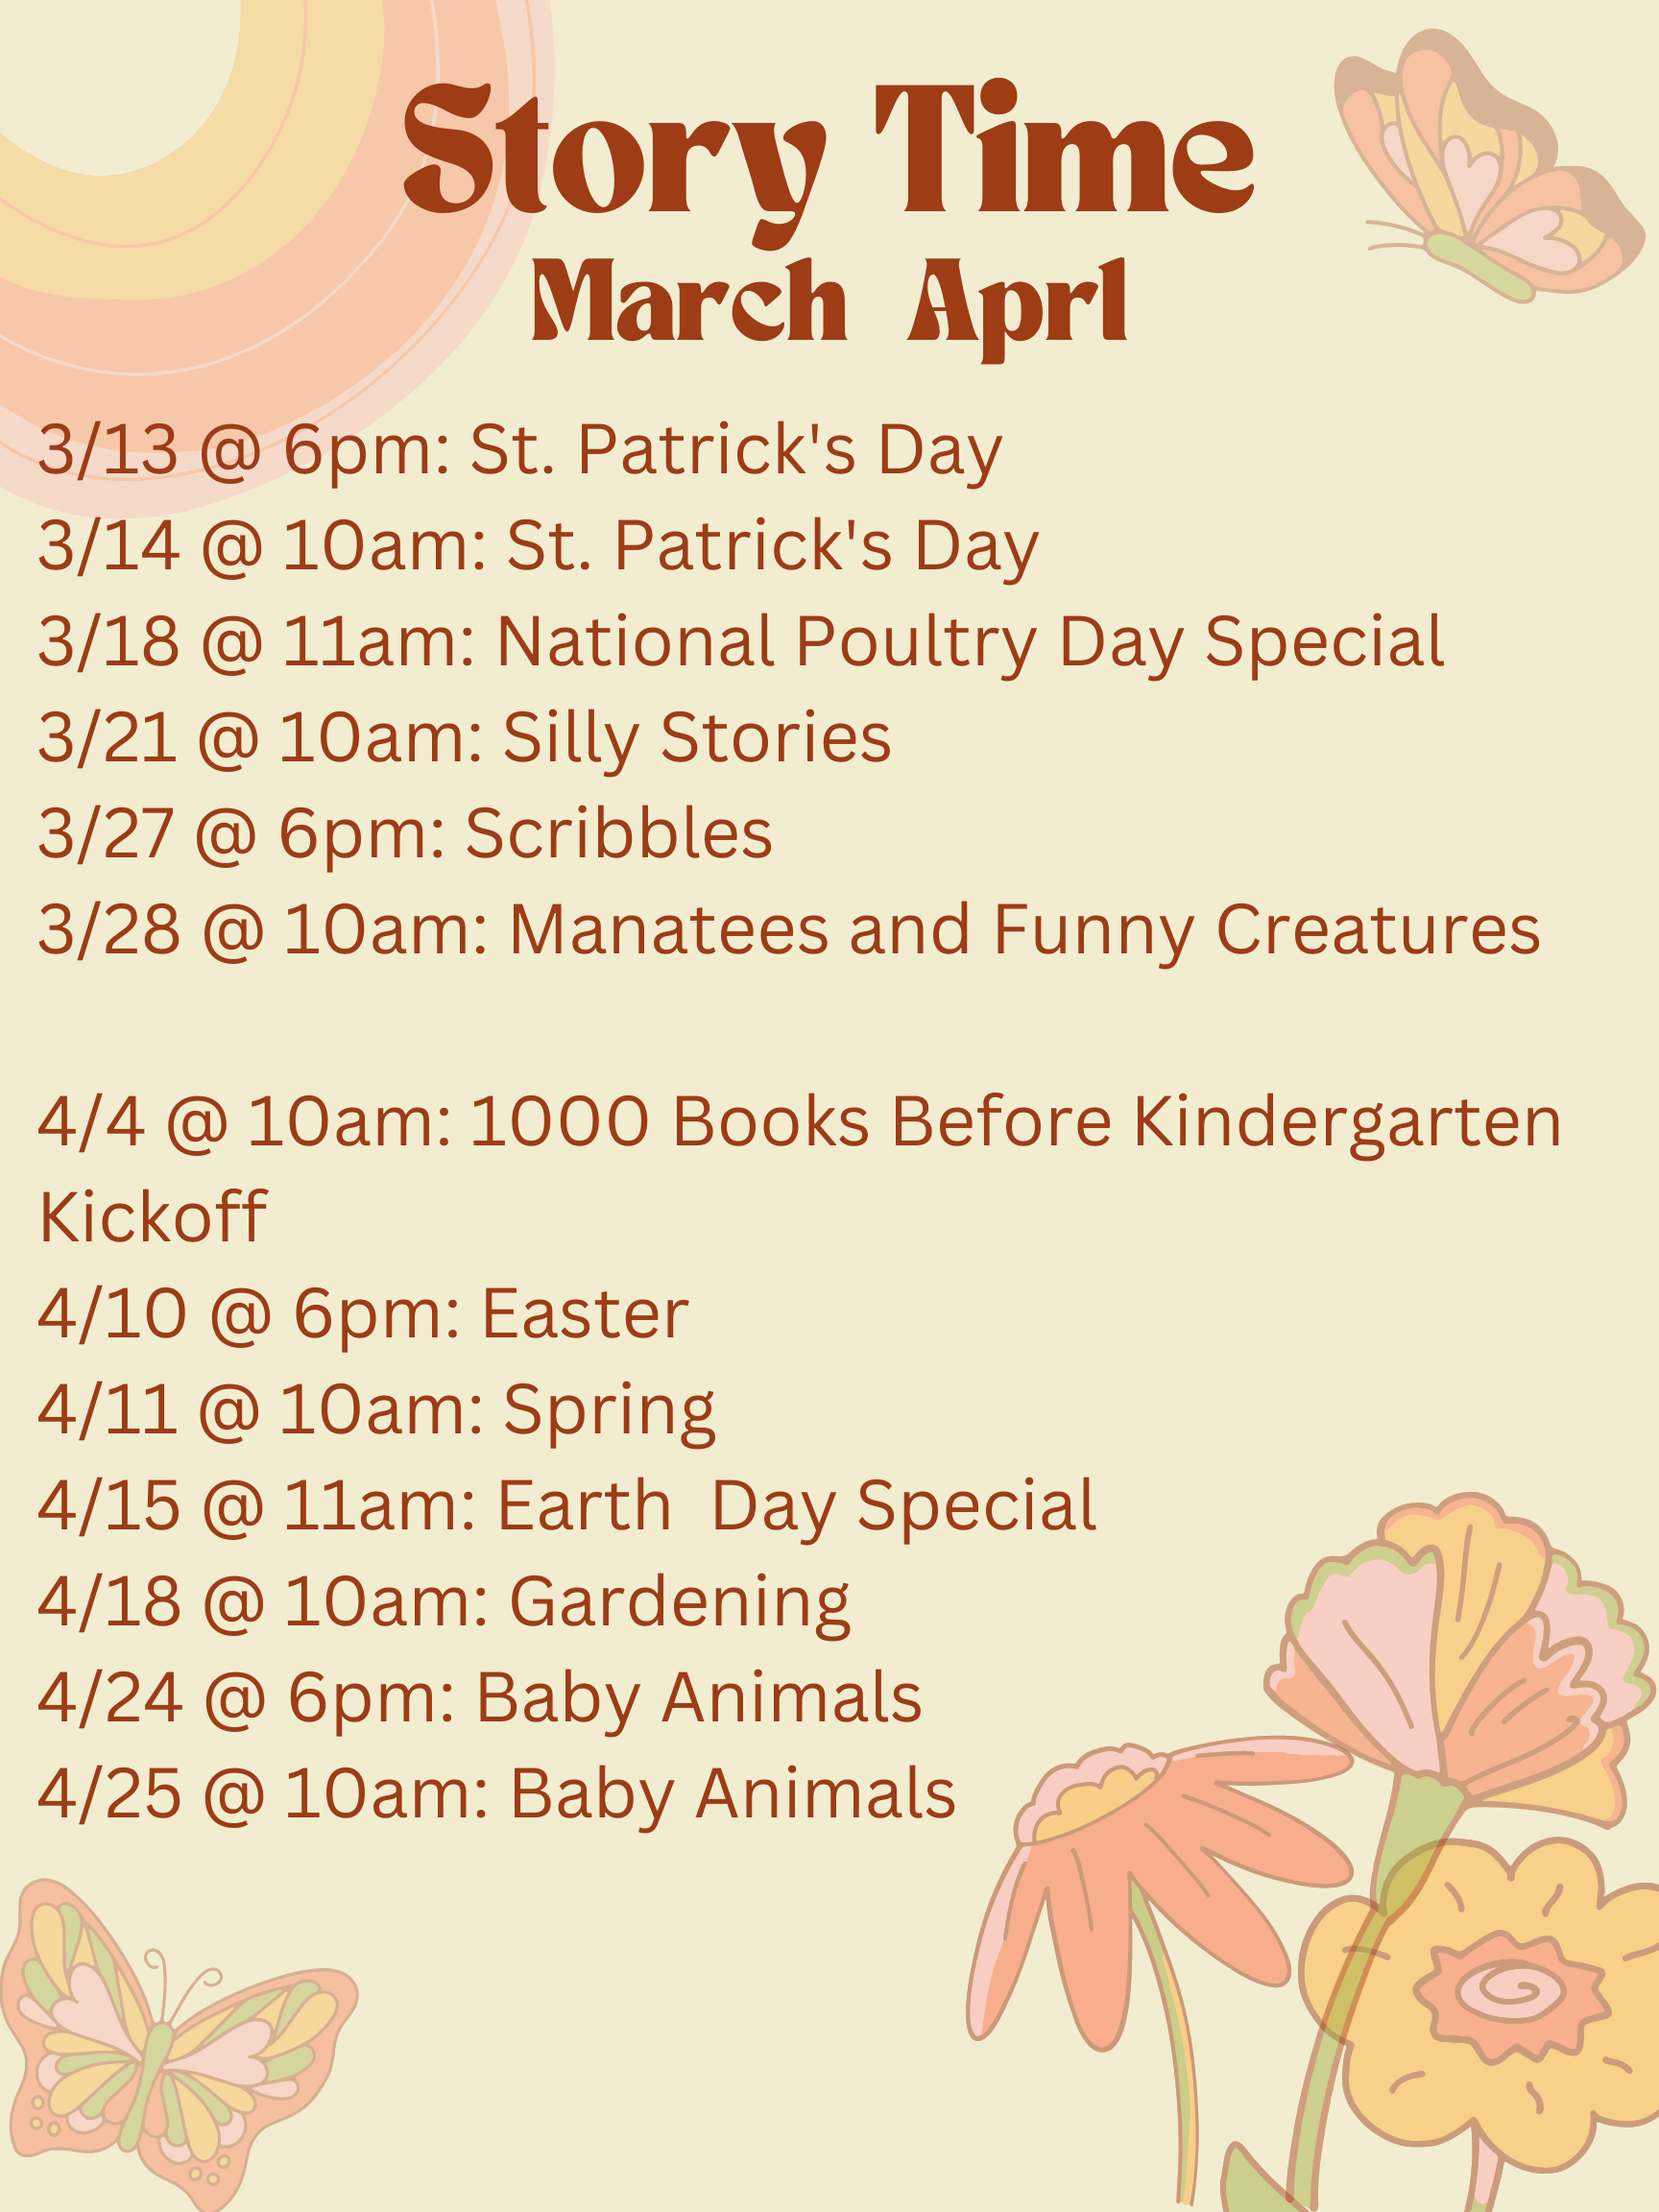 Story Time March April